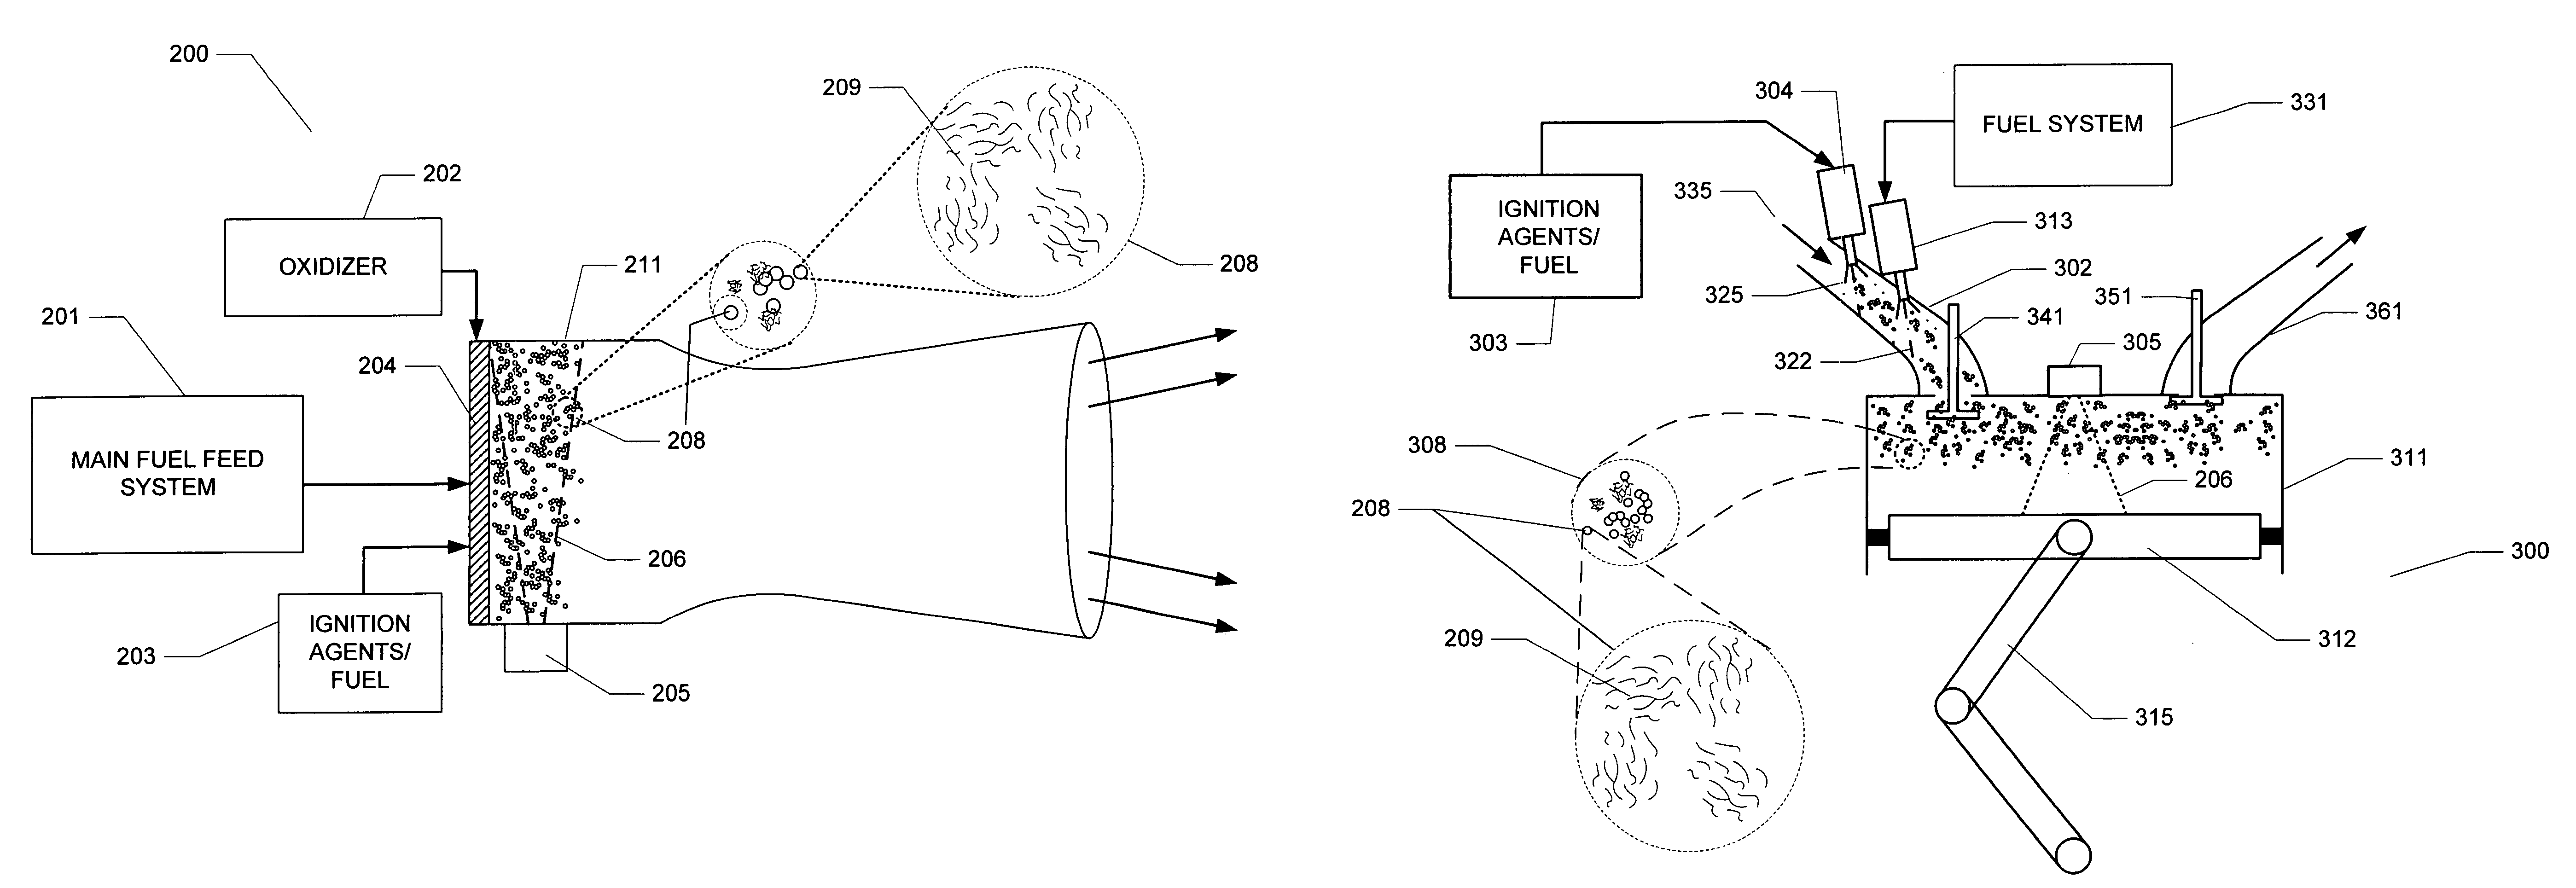 Apparatus for distributed ignition of fuels by light sources